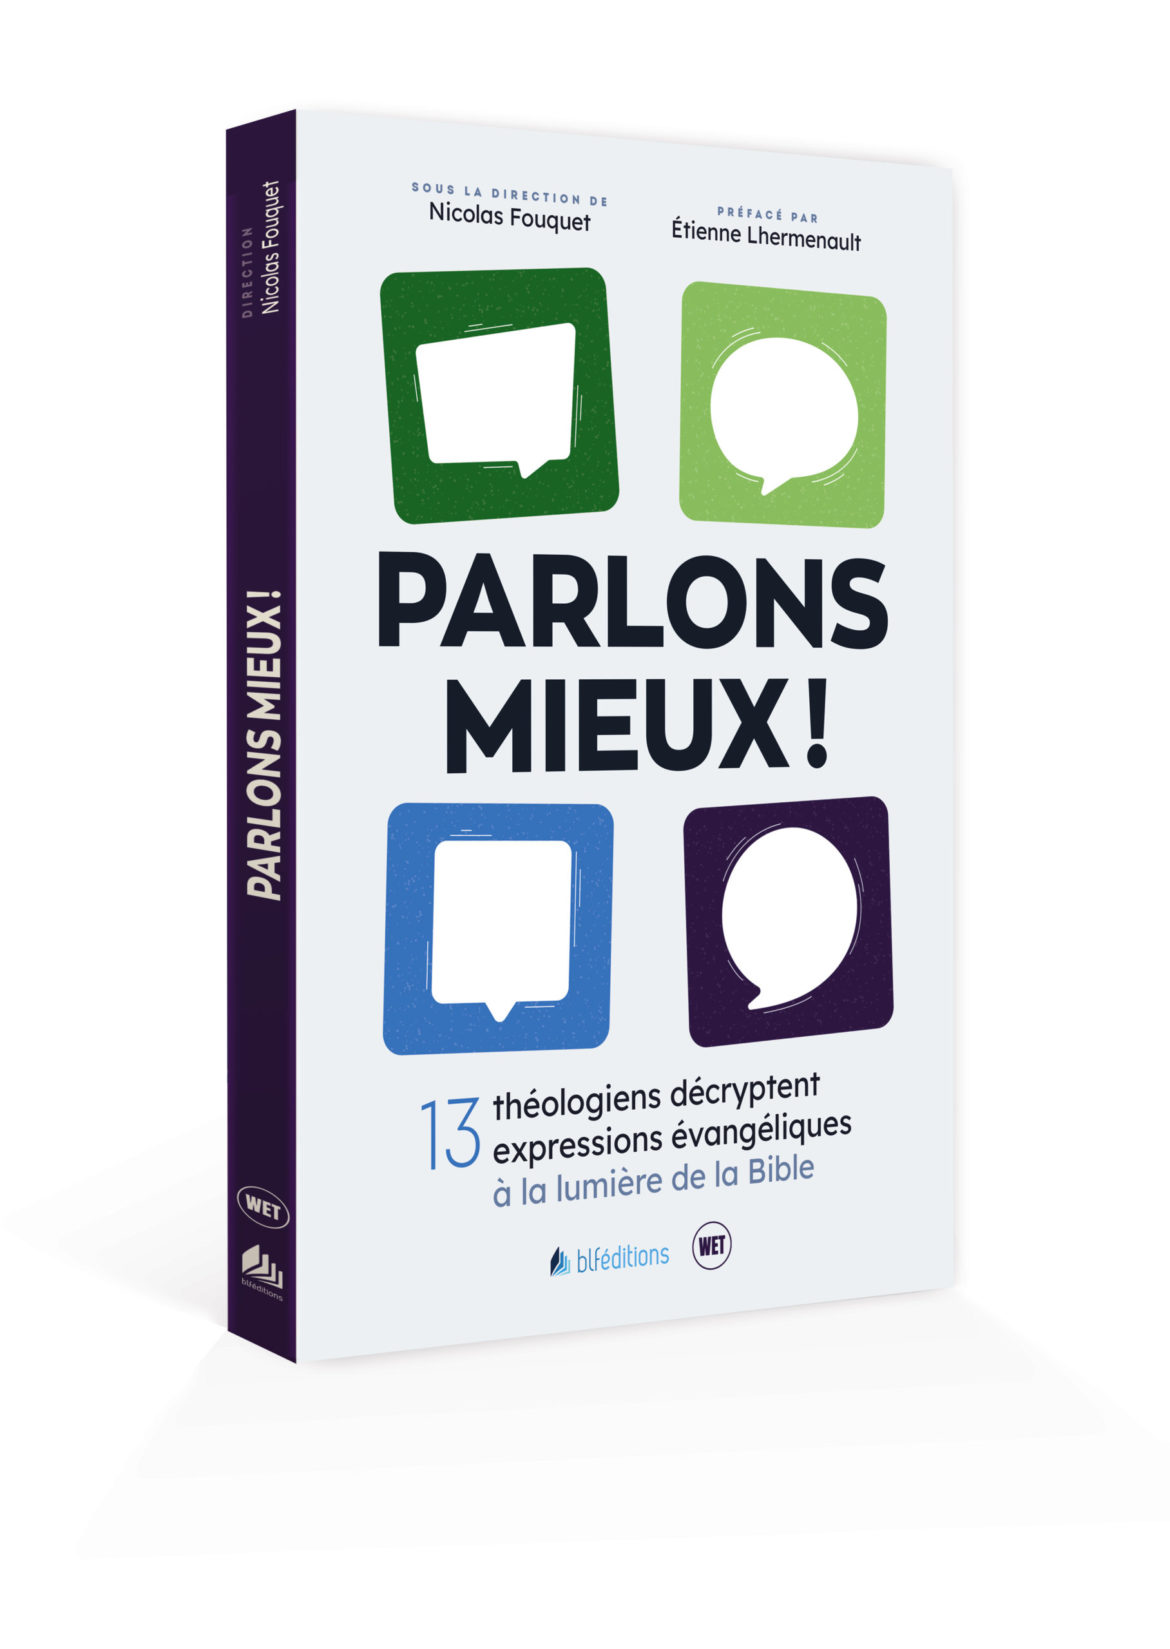 G14-Parlons-mieux--scaled.jpg